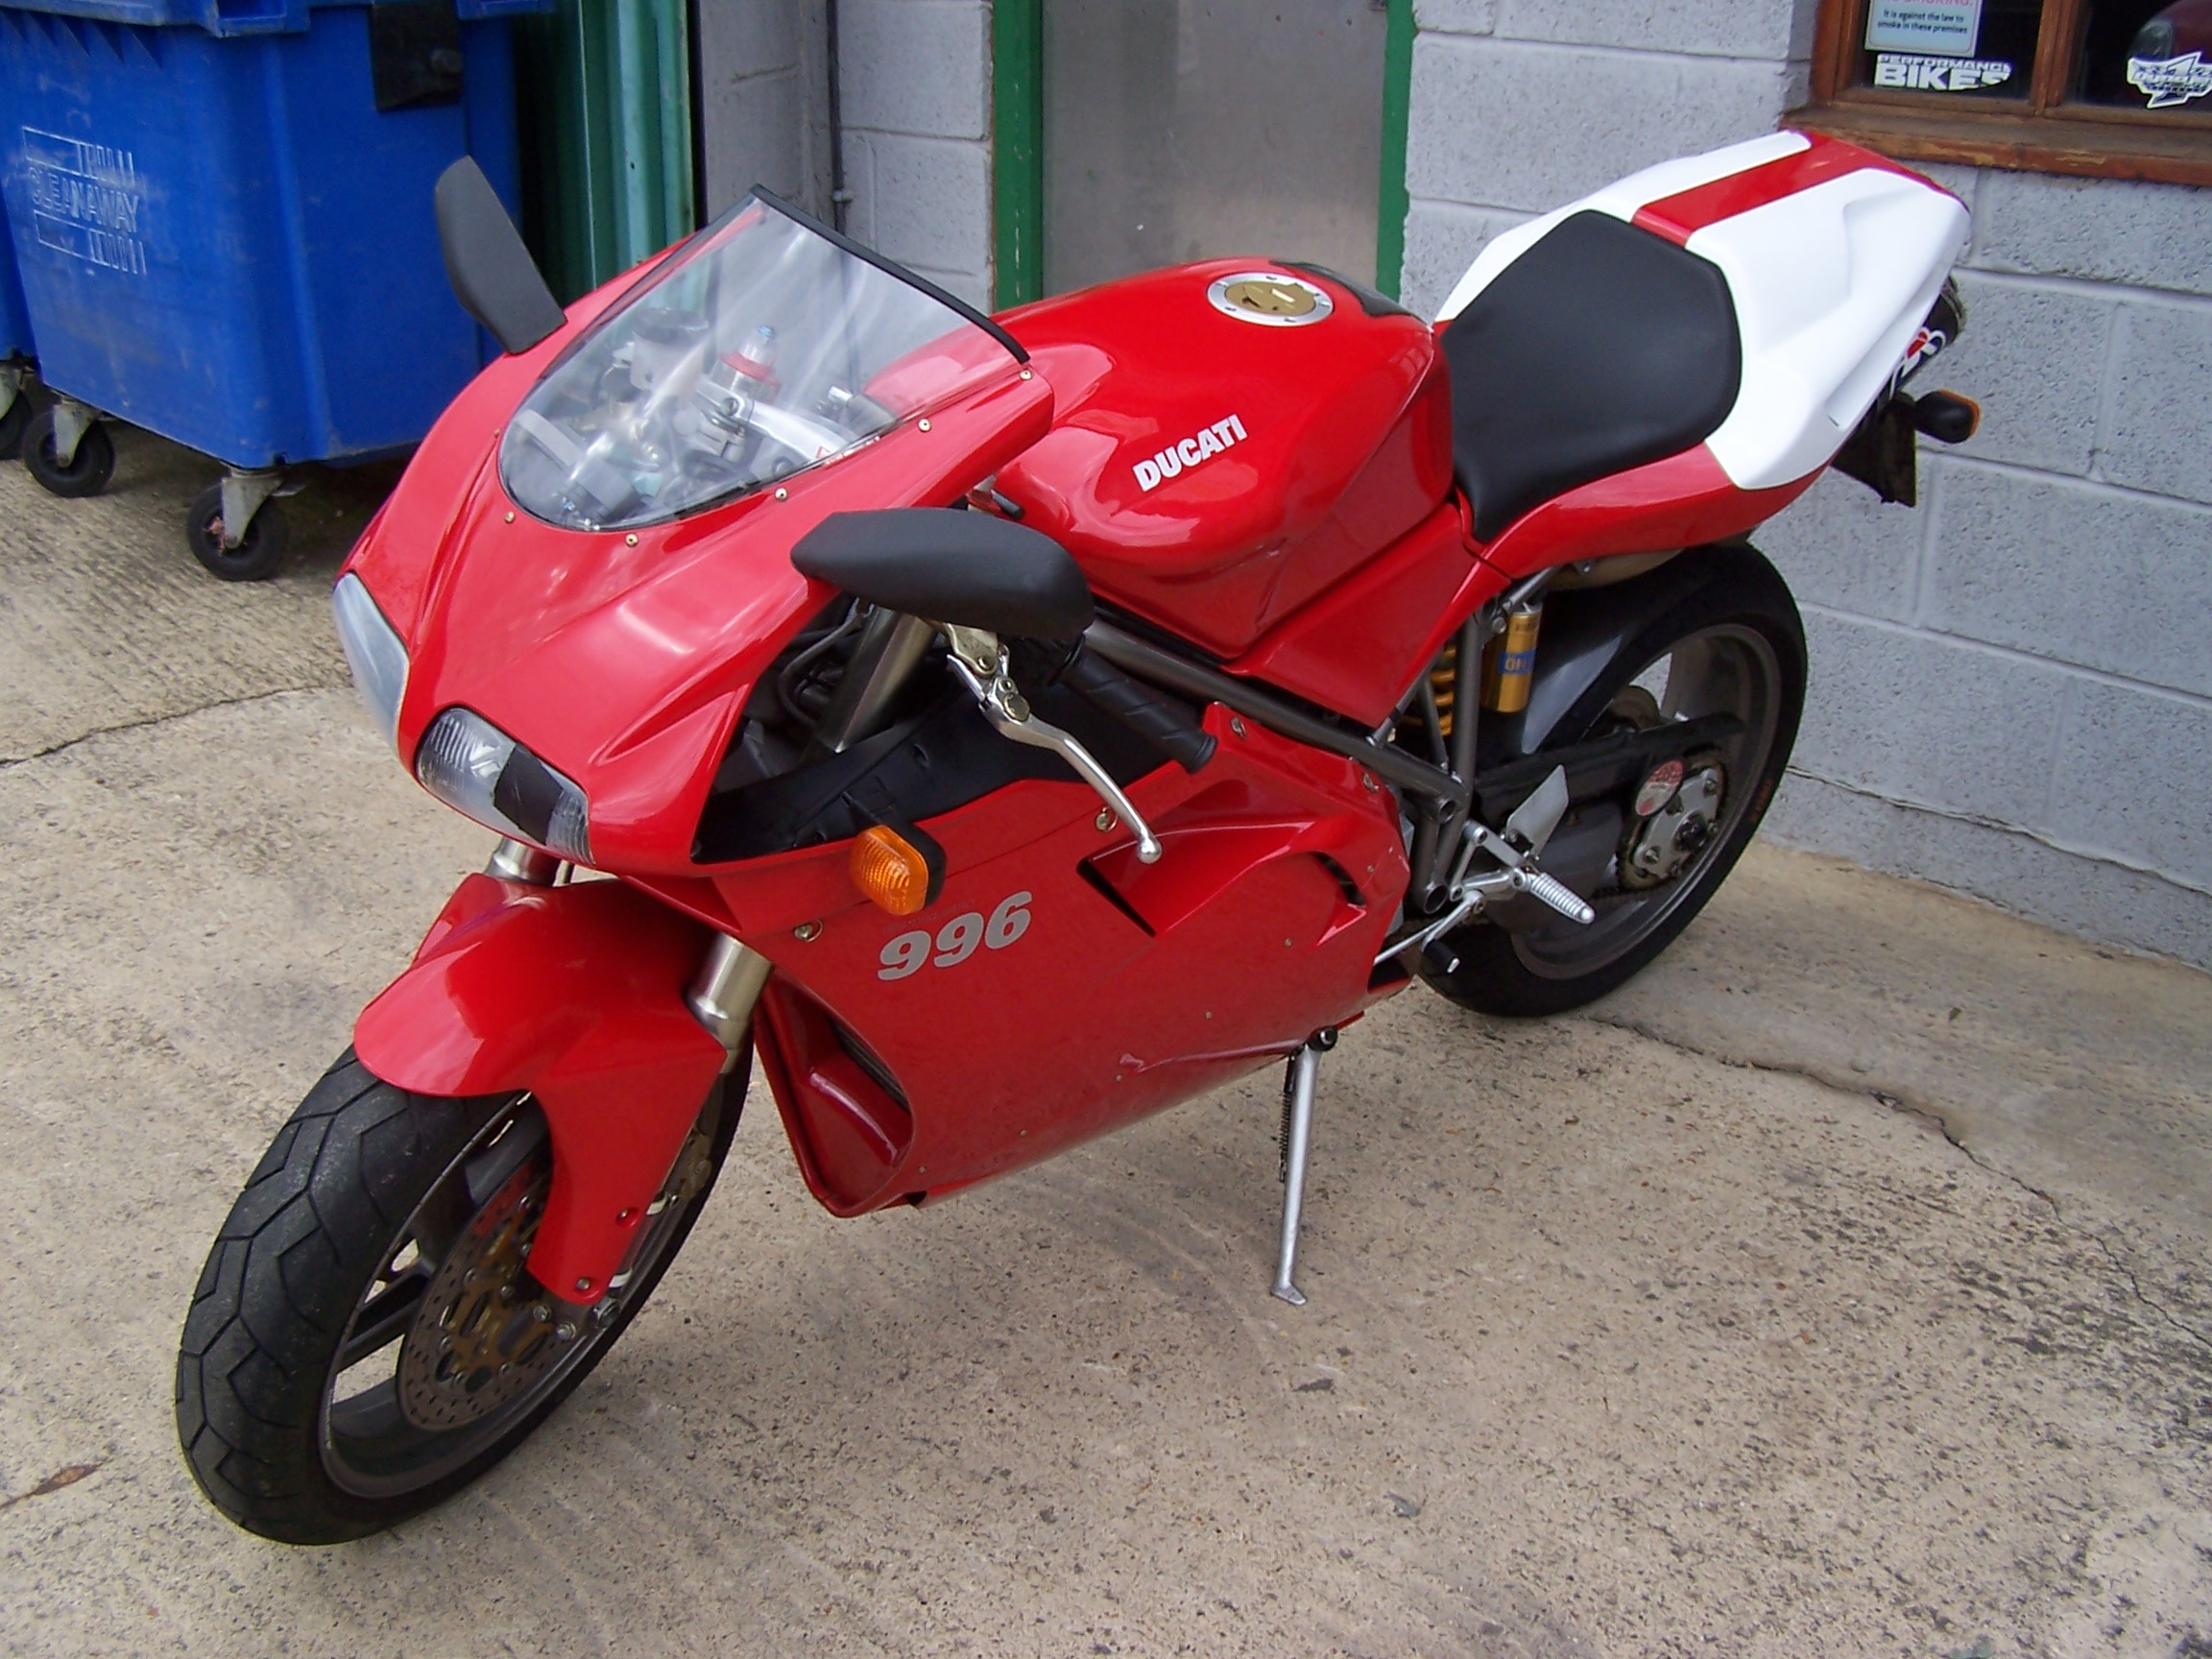 2002 Ducati 996 new belts and full service